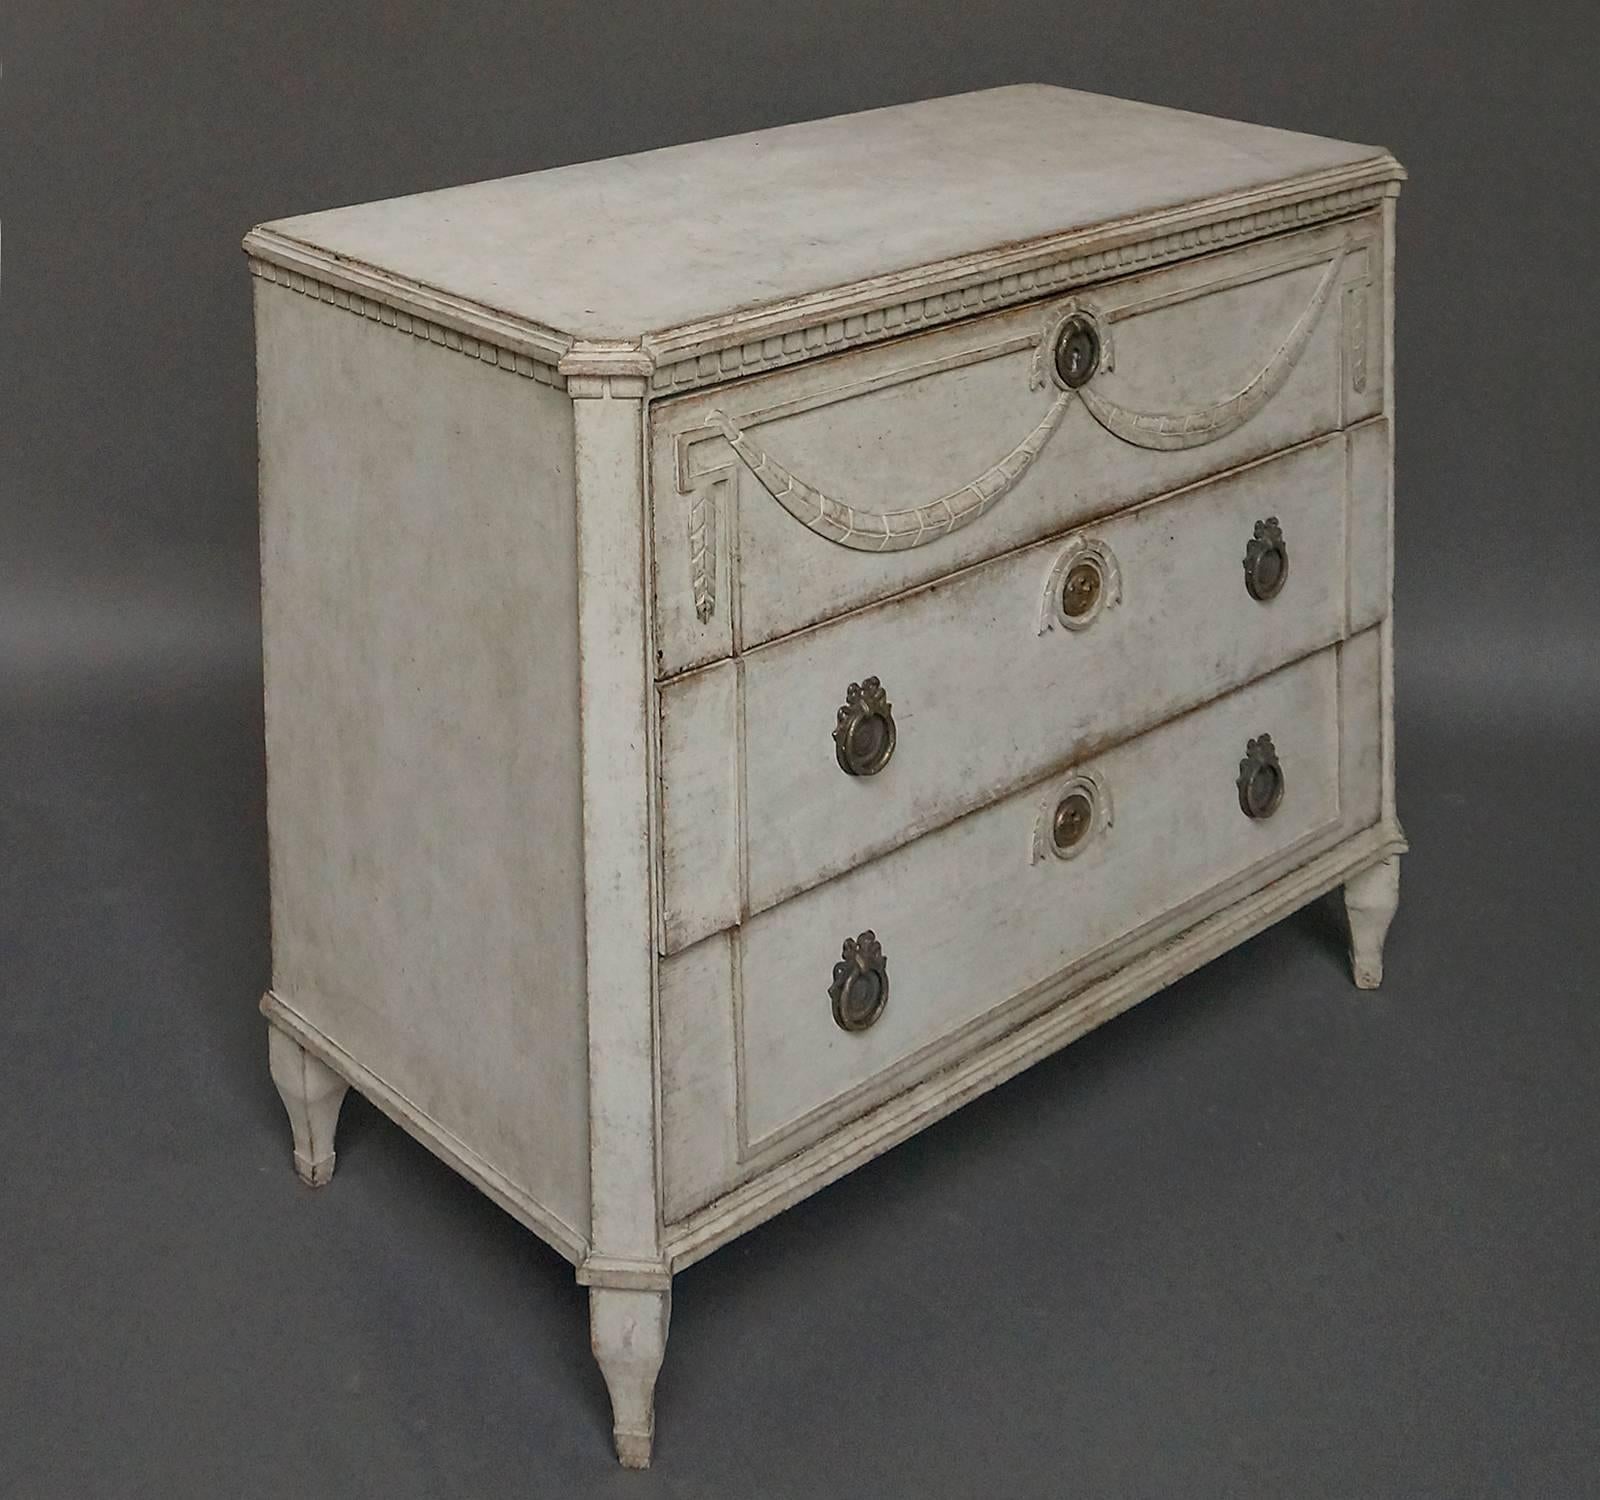 Swedish neoclassical chest of drawers, circa 1860, with remarkable carving on the drawer fronts. Dentil molding under the shaped top and above the canted corner posts. Square legs with a curved taper.